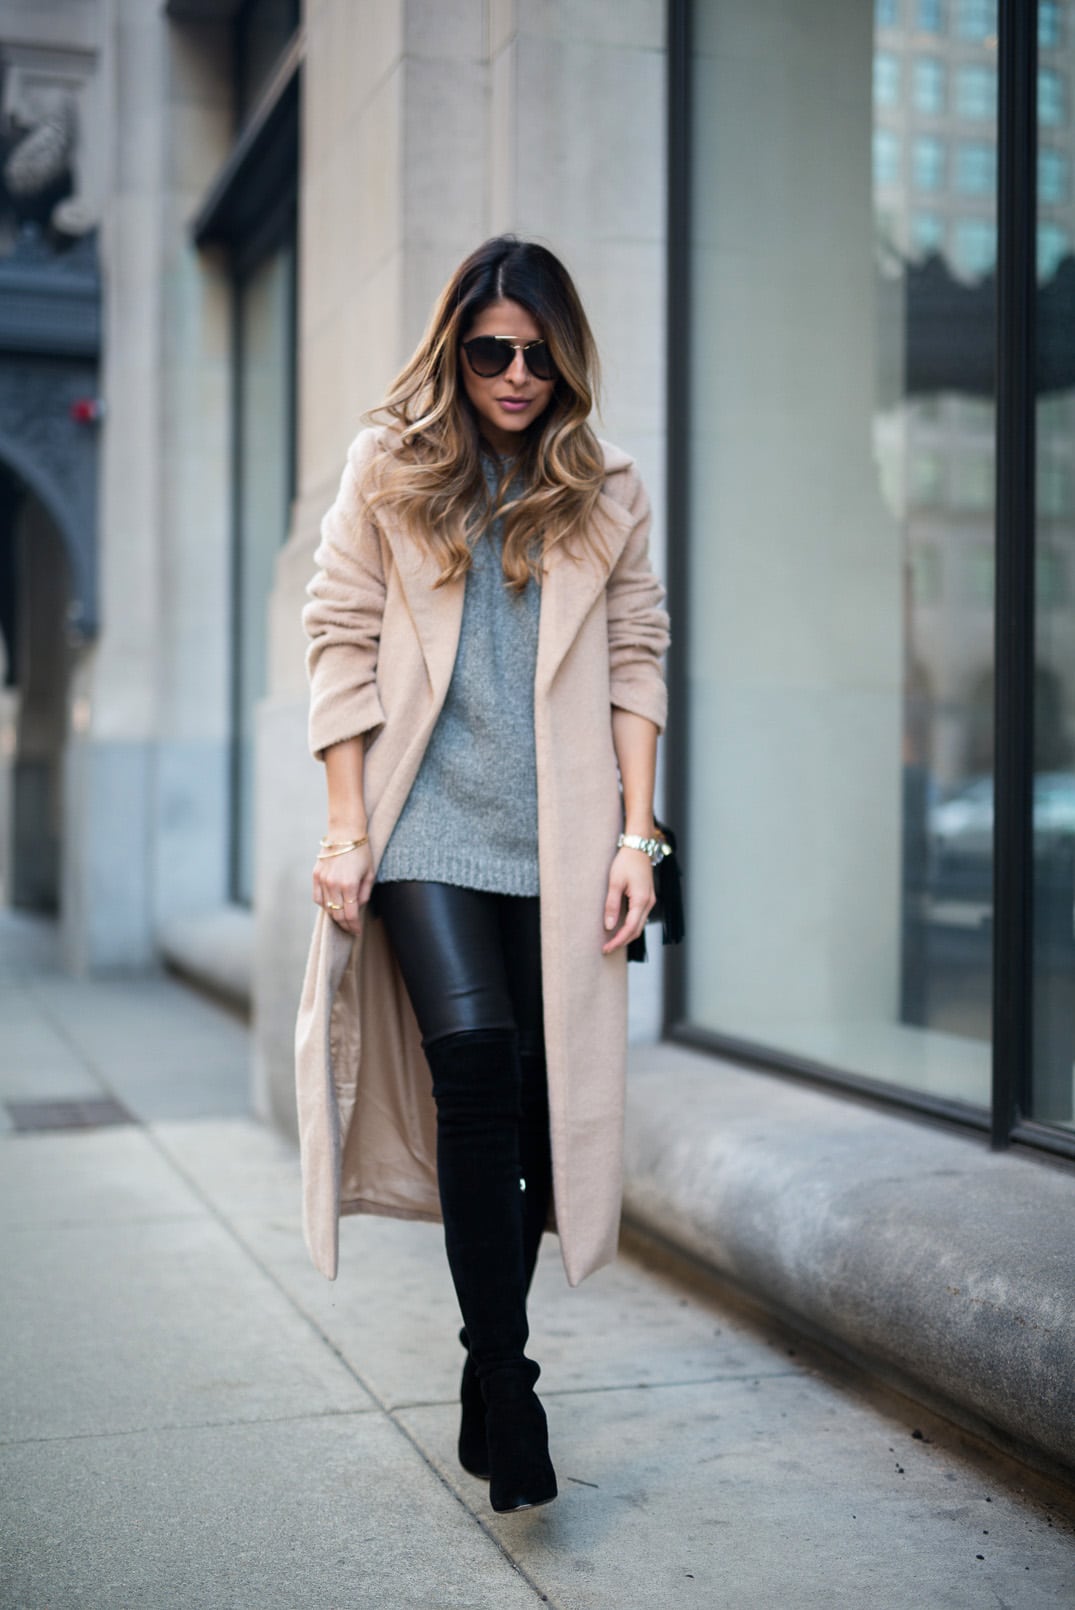 Pam Hetlinger wearing a Camel Coat, Gray Sweater, Leather Leggins, Over the Knee Boots, Winter Outfit Inspiration.